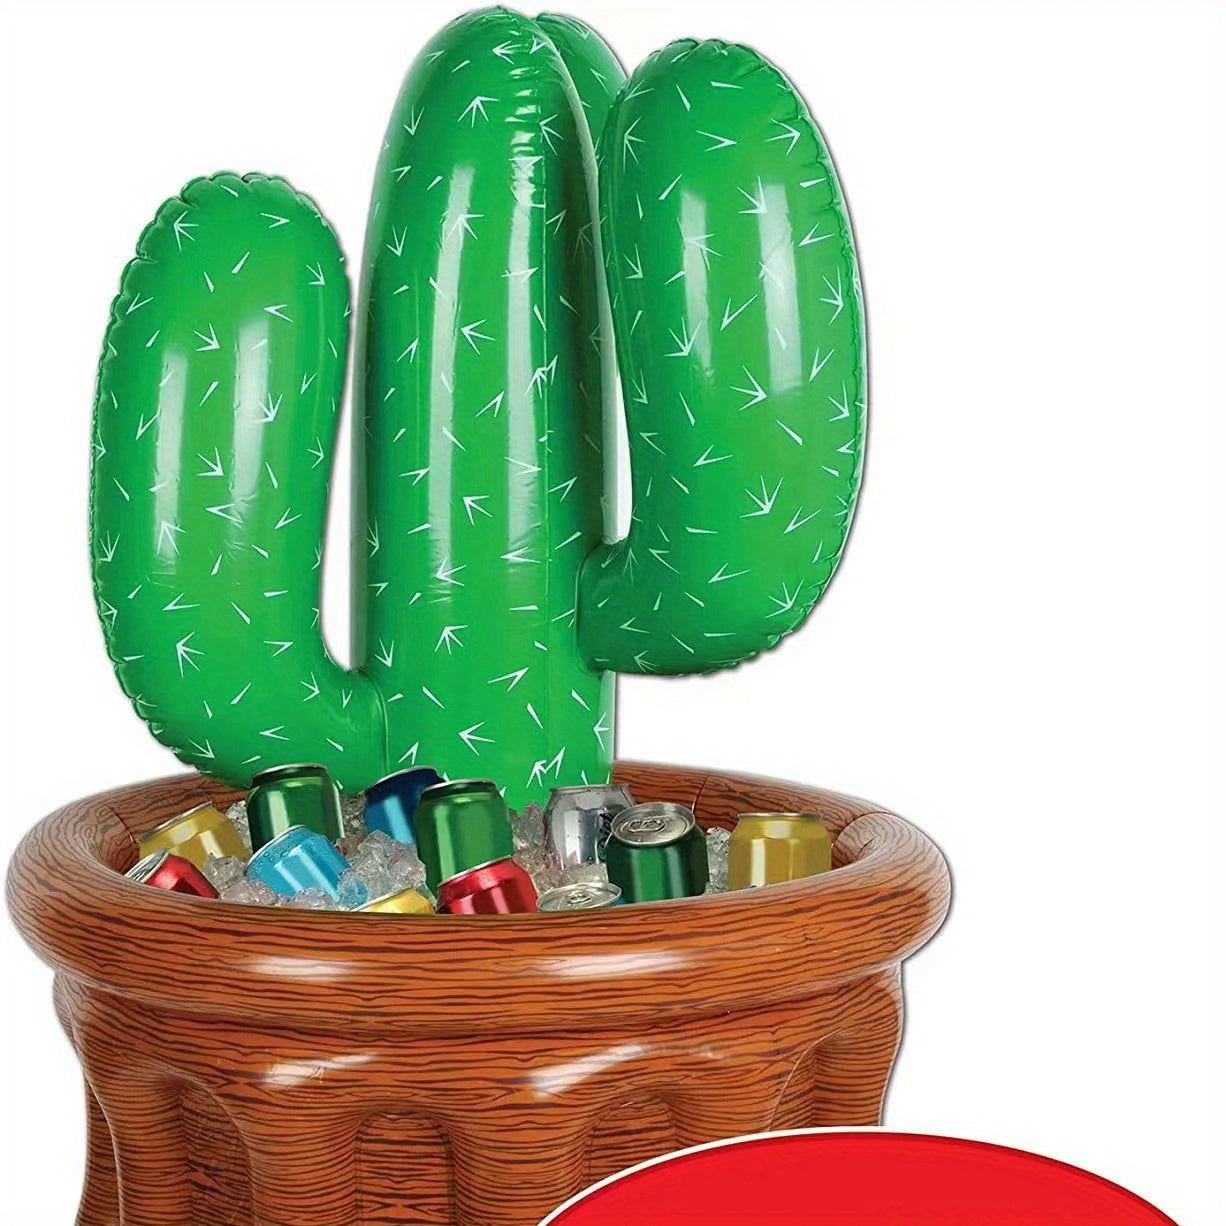 Summer Pool Party Essential: Inflatable Cactus Cooler for Chilled Drinks